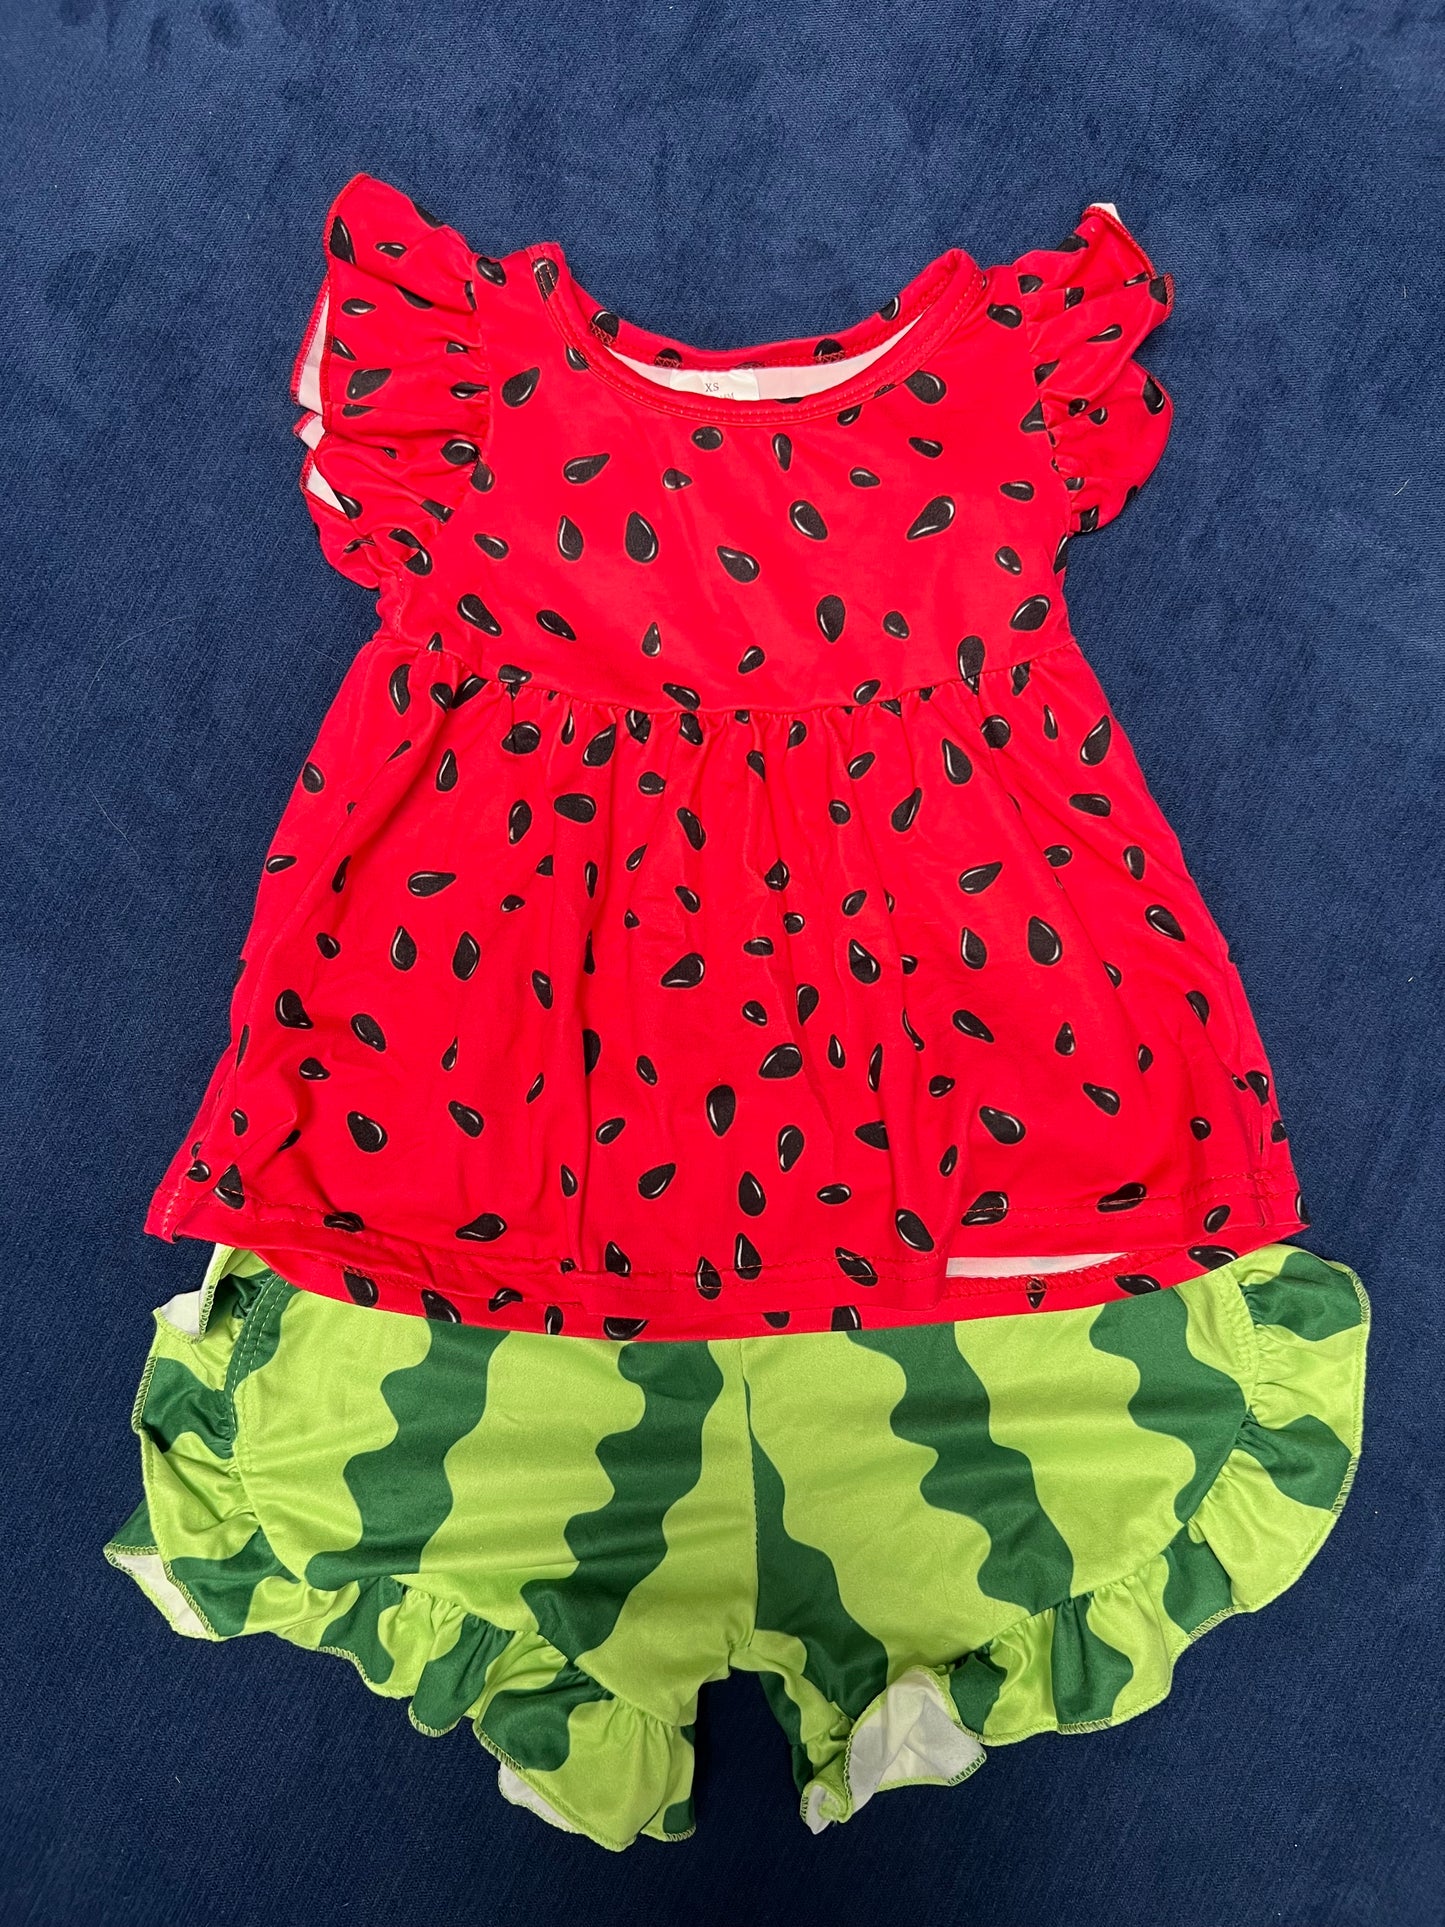 Toddler girl watermelon shirt/shorts set. Size listed as 12-18mo but fits like 24mo in my opinion. EUC.